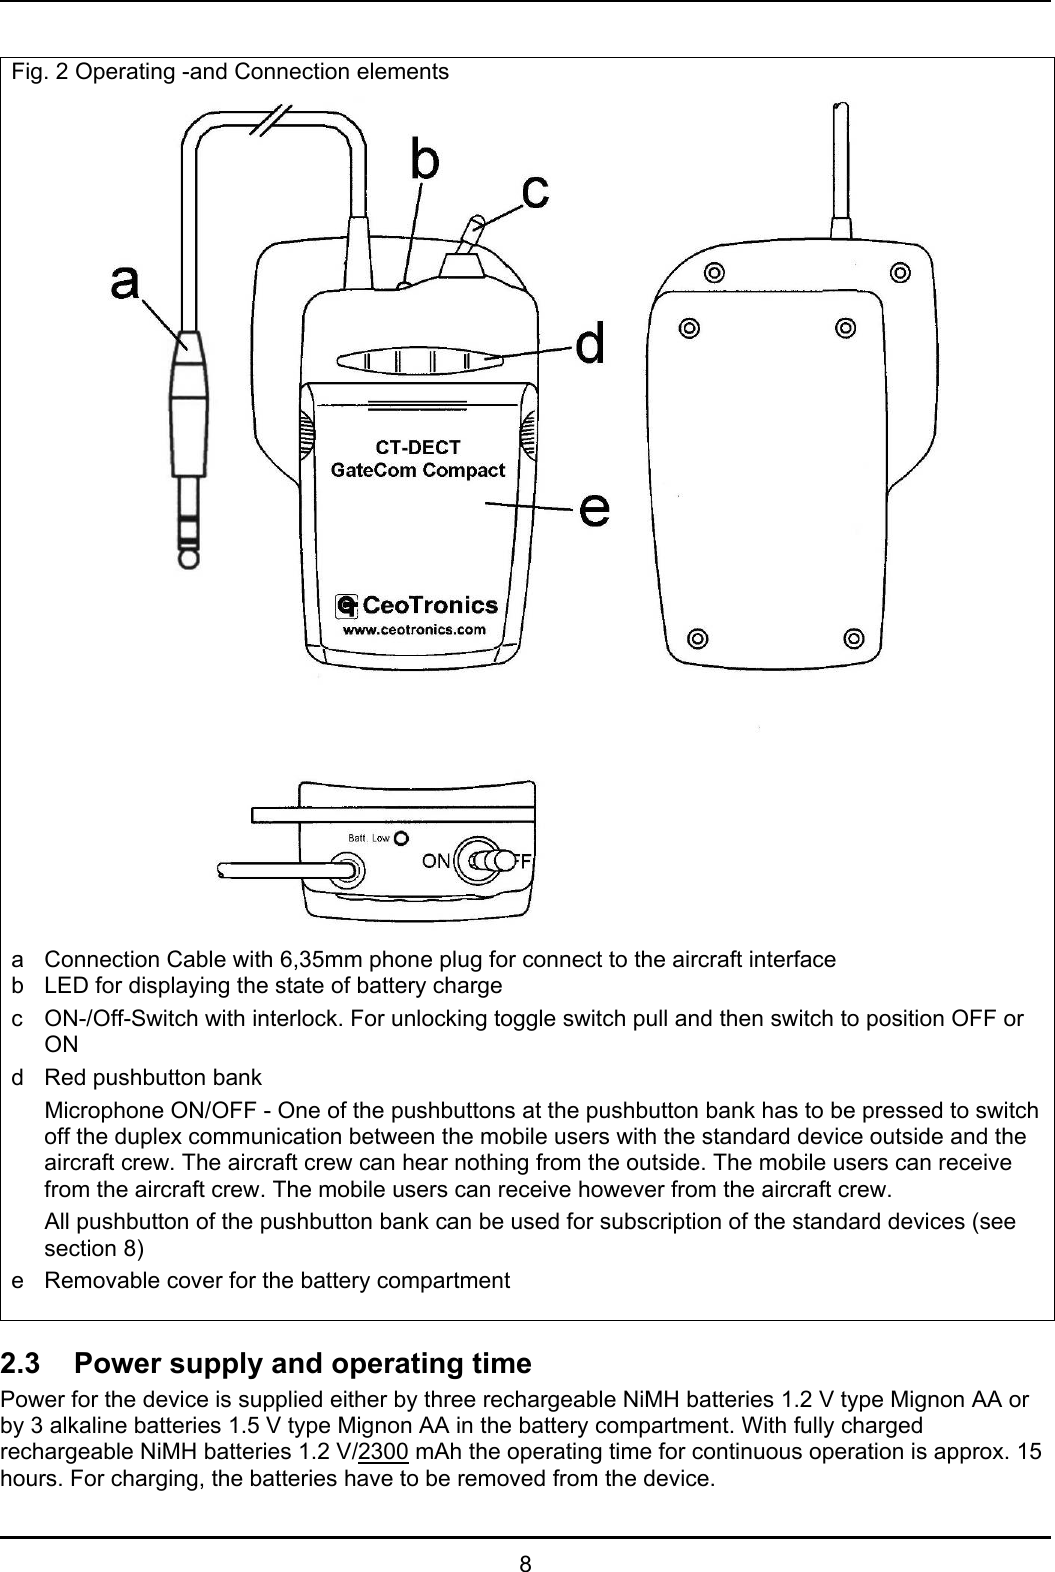   8  Fig. 2 Operating -and Connection elements  a  Connection Cable with 6,35mm phone plug for connect to the aircraft interface b  LED for displaying the state of battery charge c  ON-/Off-Switch with interlock. For unlocking toggle switch pull and then switch to position OFF or ON d  Red pushbutton bank    Microphone ON/OFF - One of the pushbuttons at the pushbutton bank has to be pressed to switch off the duplex communication between the mobile users with the standard device outside and the aircraft crew. The aircraft crew can hear nothing from the outside. The mobile users can receive from the aircraft crew. The mobile users can receive however from the aircraft crew.   All pushbutton of the pushbutton bank can be used for subscription of the standard devices (see section 8) e  Removable cover for the battery compartment  2.3  Power supply and operating time Power for the device is supplied either by three rechargeable NiMH batteries 1.2 V type Mignon AA or by 3 alkaline batteries 1.5 V type Mignon AA in the battery compartment. With fully charged rechargeable NiMH batteries 1.2 V/2300 mAh the operating time for continuous operation is approx. 15 hours. For charging, the batteries have to be removed from the device. 